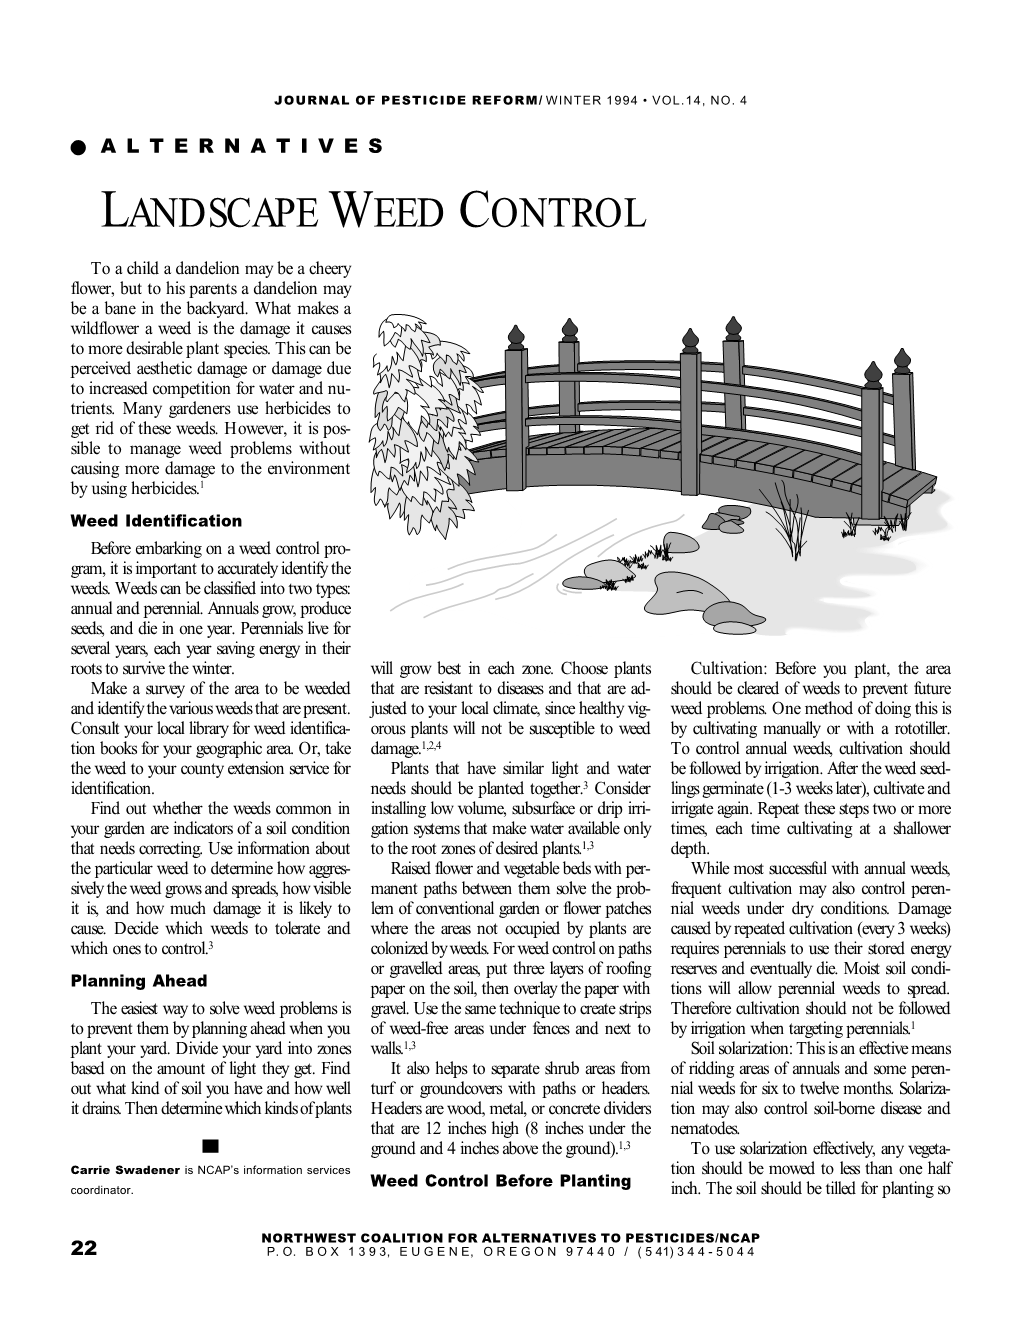 Landscape Weed Control